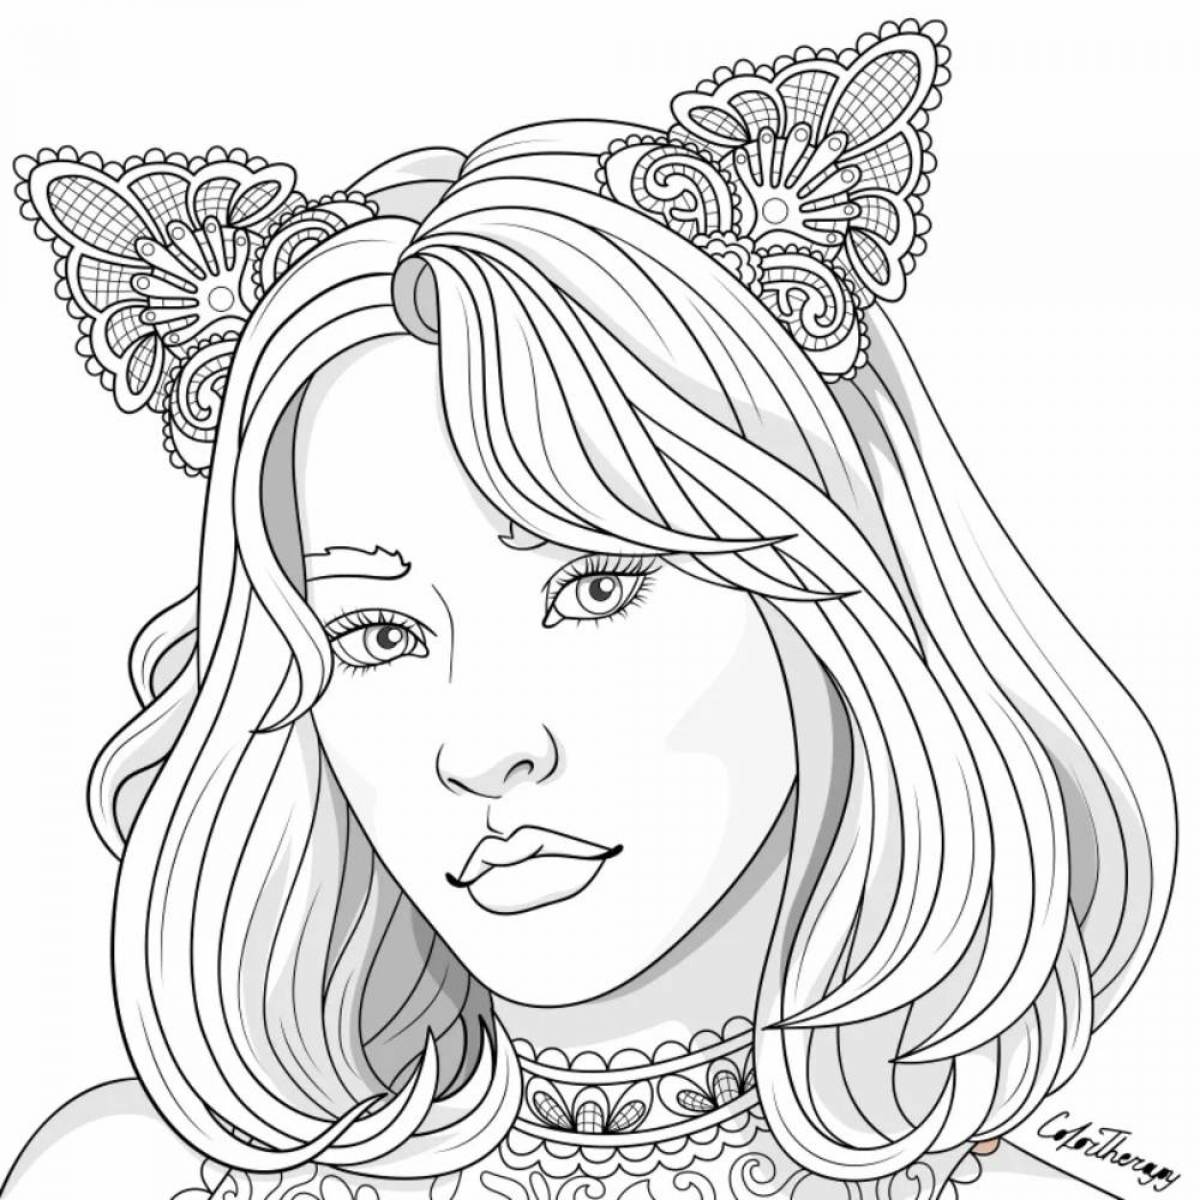 Coloring page 12 years old